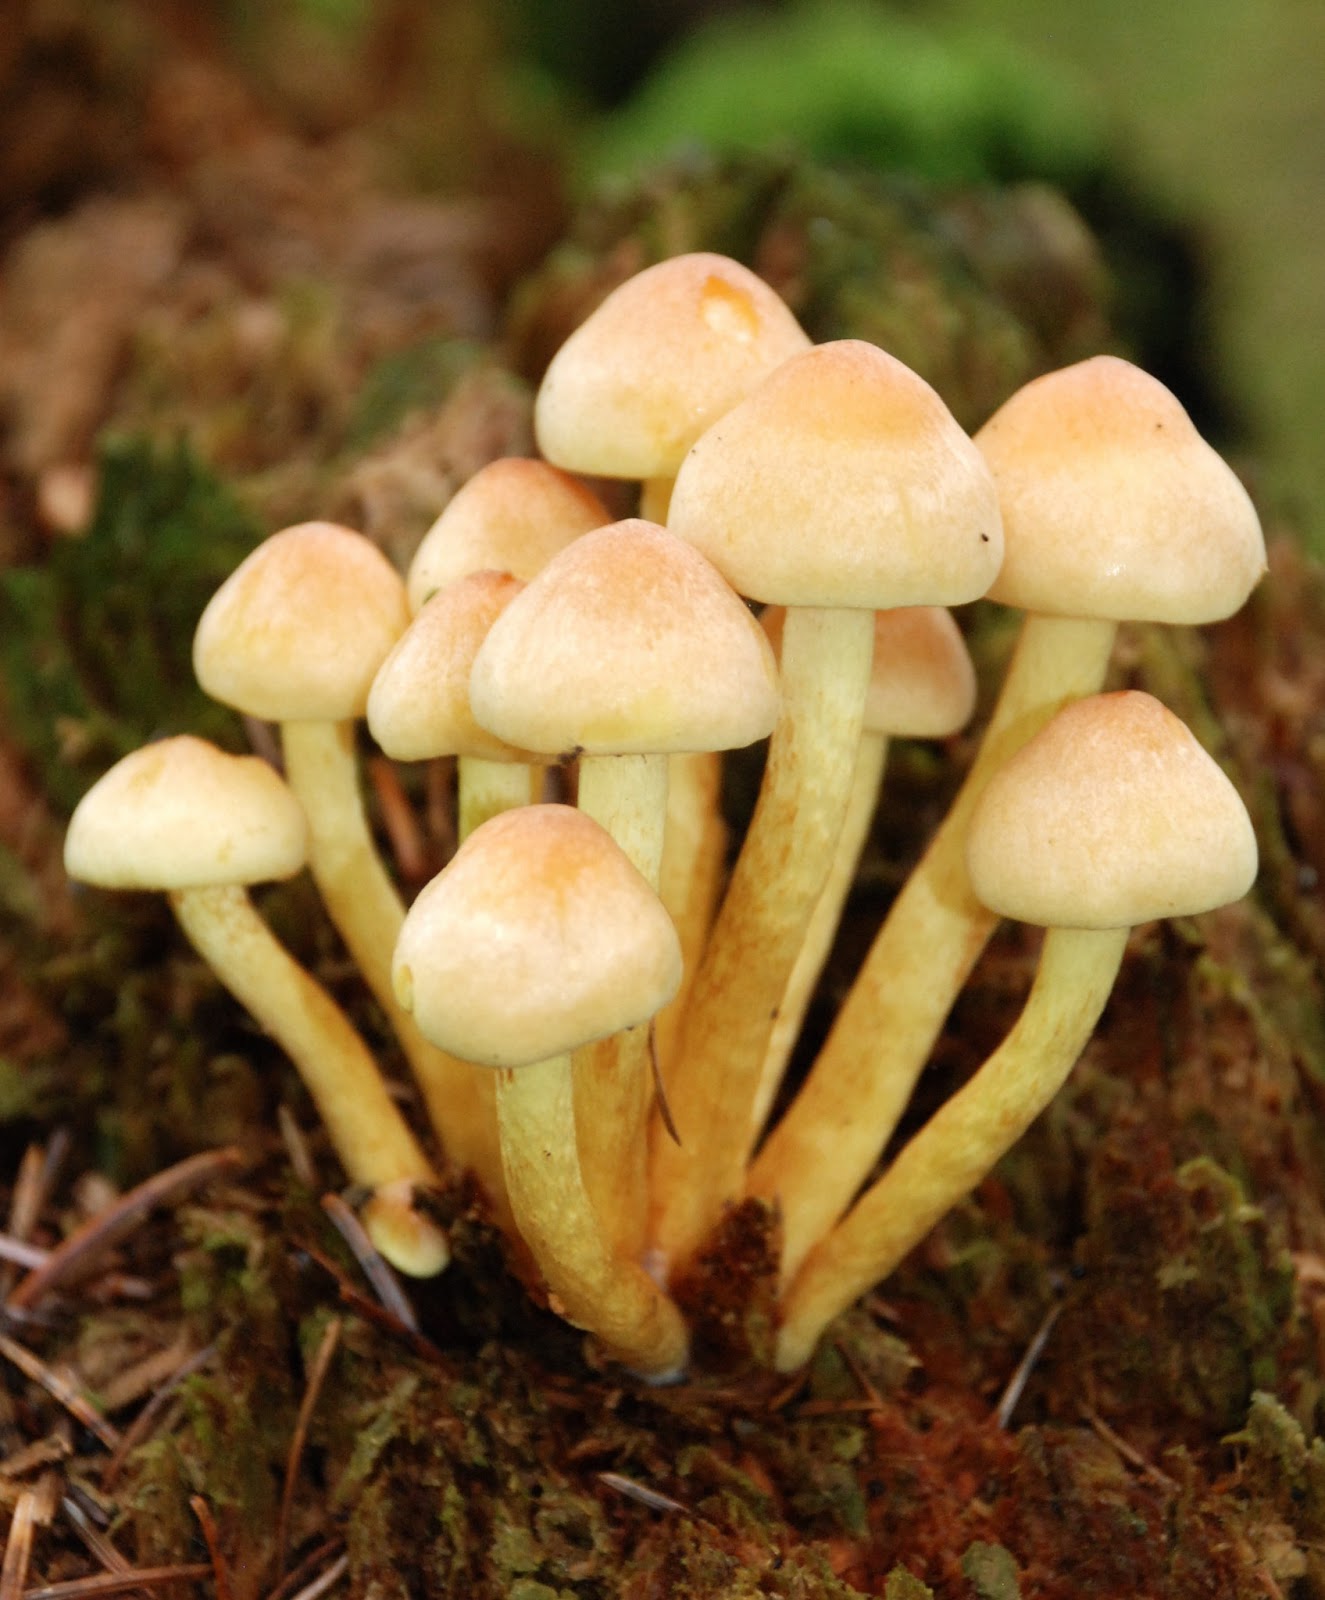 FORESTRY - LEARNING: FUNGI DEFINITION | Fungi are organisms that ...